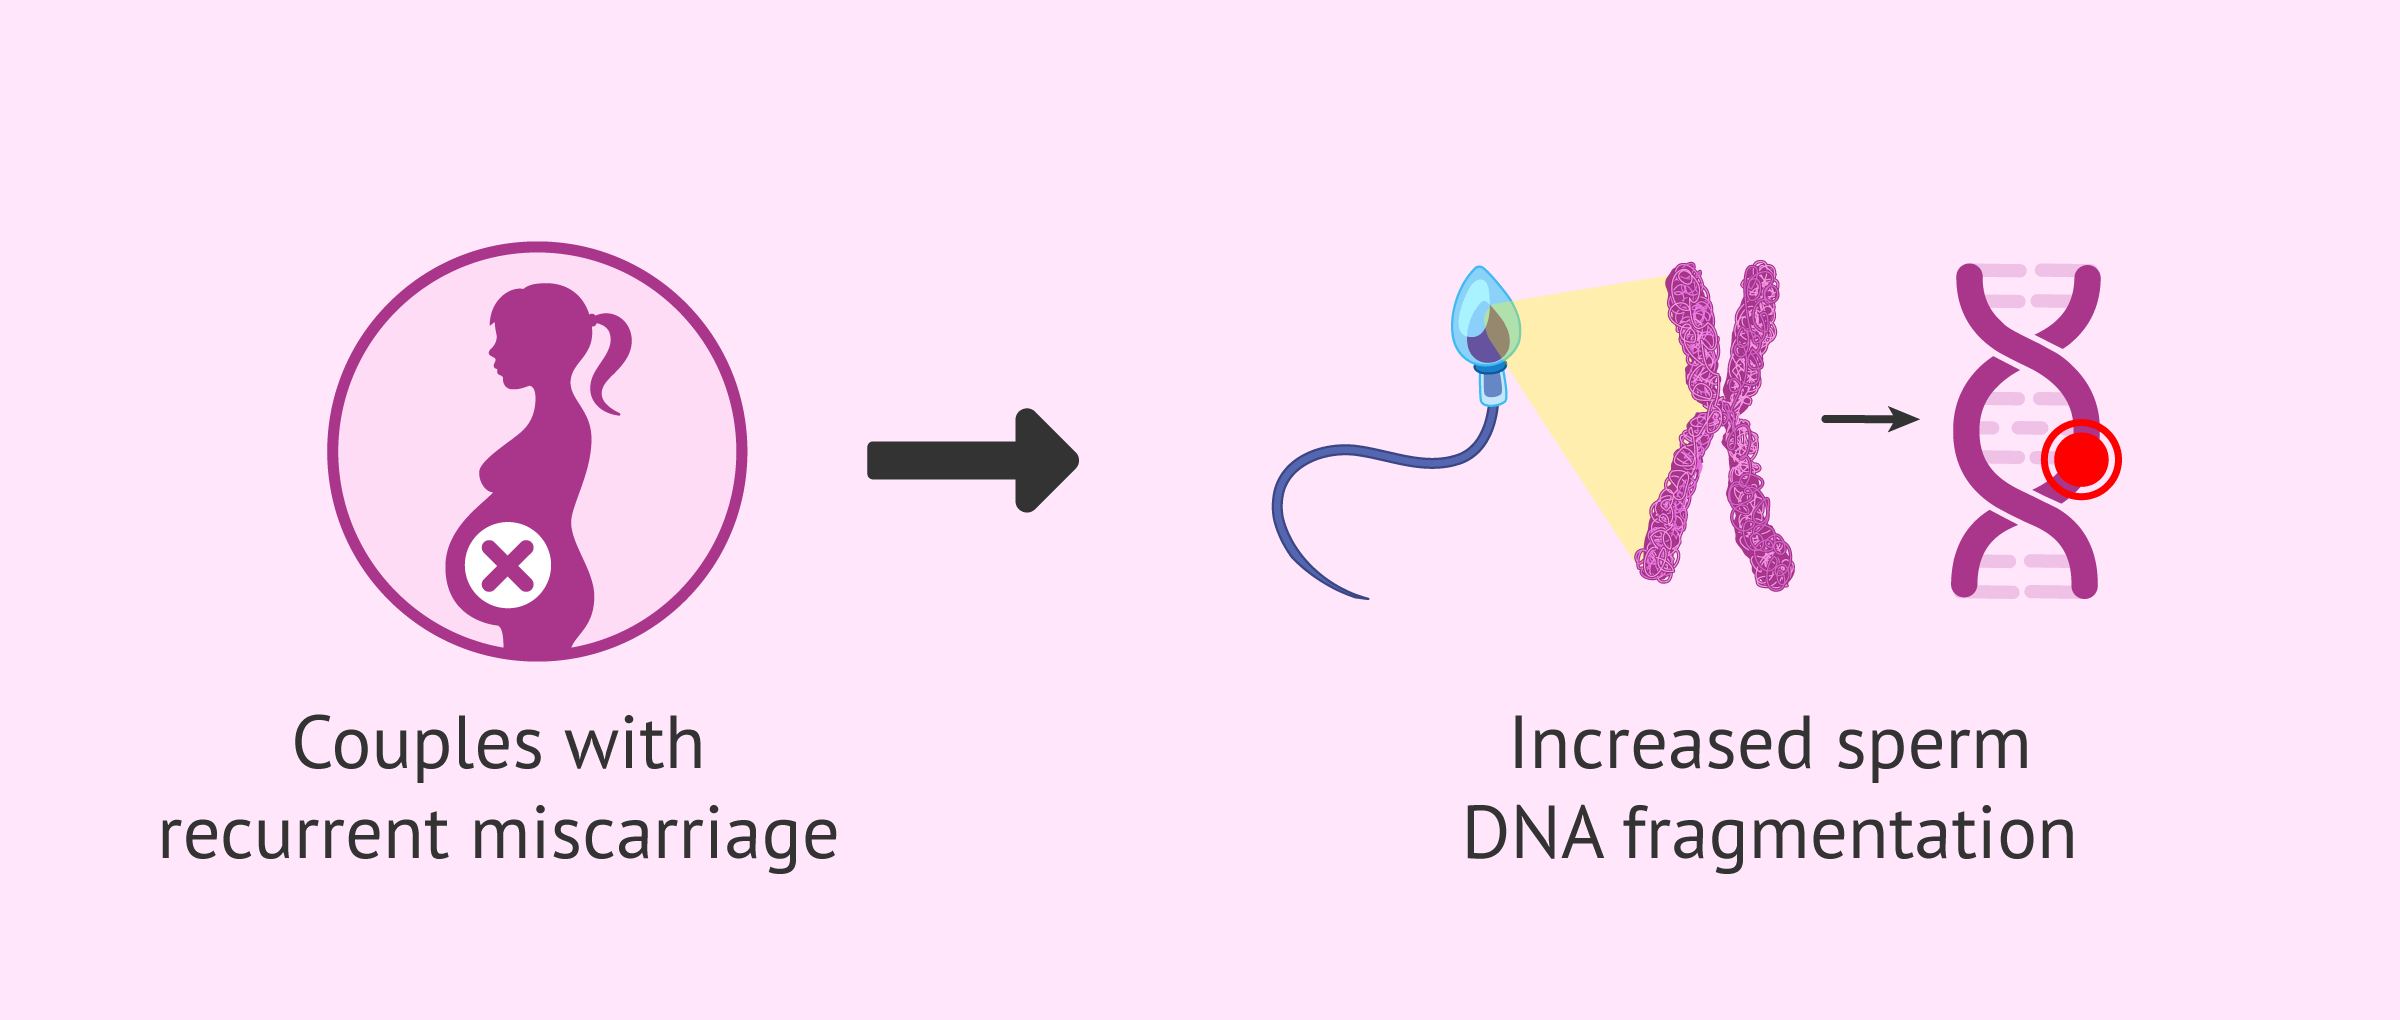 Sperm DNA fragmentation and recurrent miscarriage